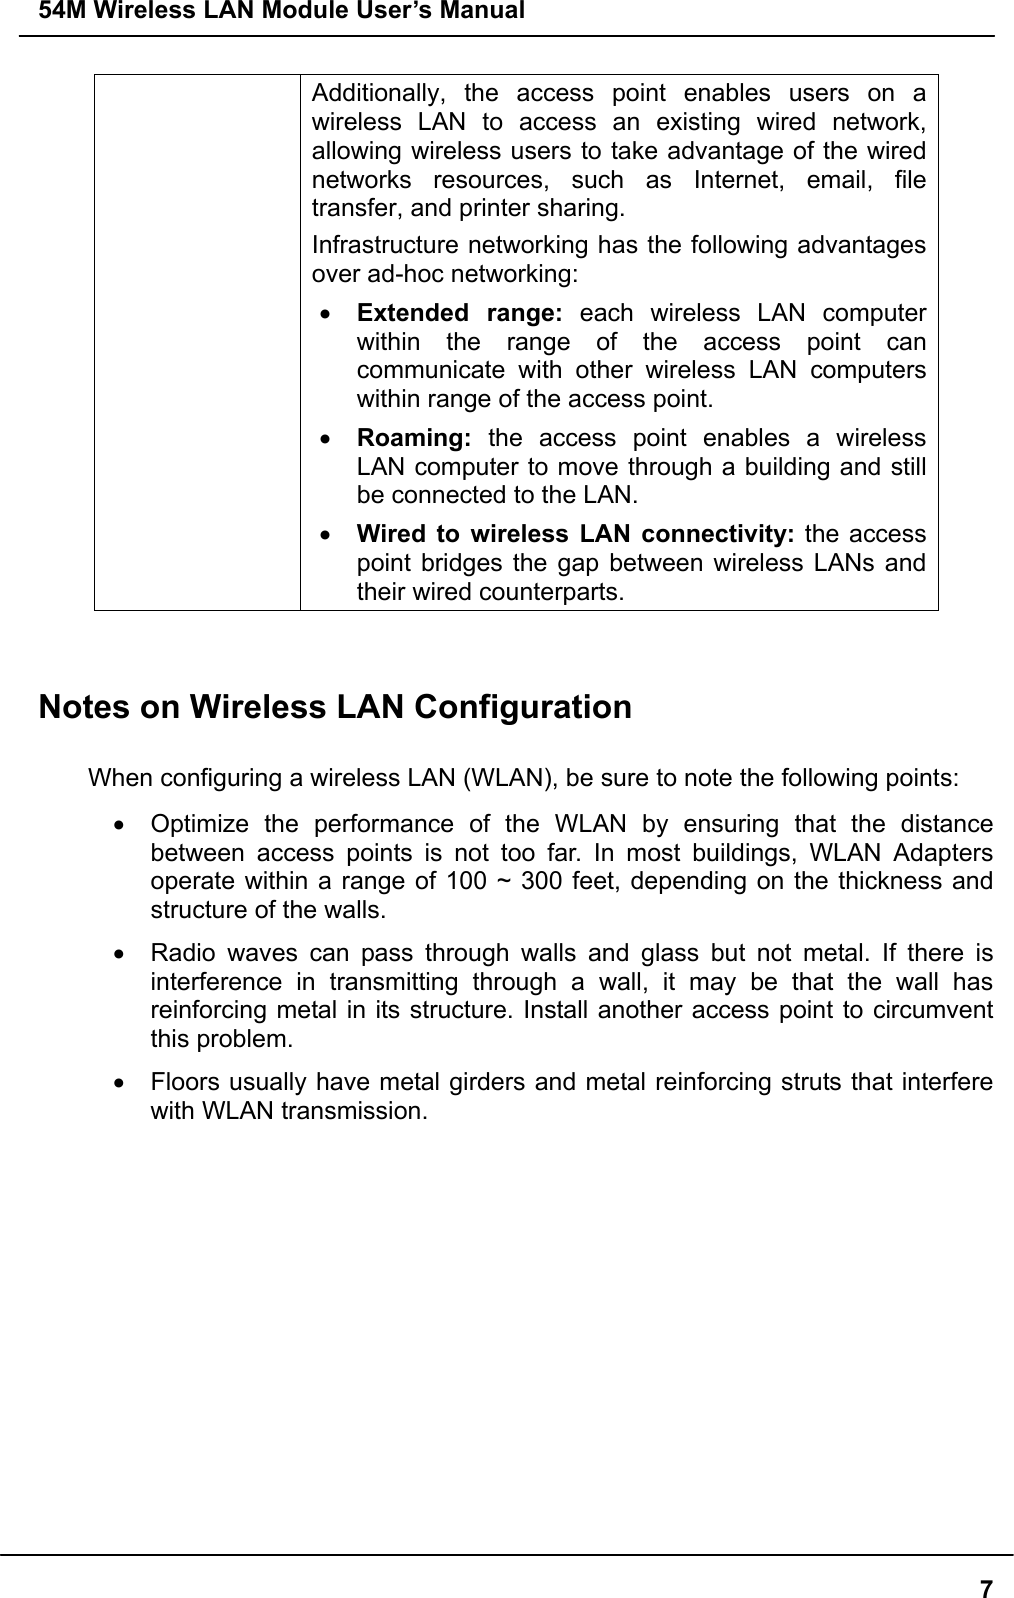 54M Wireless LAN Module User’s Manual  7Additionally, the access point enables users on a wireless LAN to access an existing wired network, allowing wireless users to take advantage of the wired networks resources, such as Internet, email, file transfer, and printer sharing.   Infrastructure networking has the following advantages over ad-hoc networking: •  Extended range: each wireless LAN computer within the range of the access point can communicate with other wireless LAN computers within range of the access point. •  Roaming: the access point enables a wireless LAN computer to move through a building and still be connected to the LAN. •  Wired to wireless LAN connectivity: the access point bridges the gap between wireless LANs and their wired counterparts.   Notes on Wireless LAN Configuration  When configuring a wireless LAN (WLAN), be sure to note the following points: •  Optimize the performance of the WLAN by ensuring that the distance between access points is not too far. In most buildings, WLAN Adapters operate within a range of 100 ~ 300 feet, depending on the thickness and structure of the walls.   •  Radio waves can pass through walls and glass but not metal. If there is interference in transmitting through a wall, it may be that the wall has reinforcing metal in its structure. Install another access point to circumvent this problem. •  Floors usually have metal girders and metal reinforcing struts that interfere with WLAN transmission.     